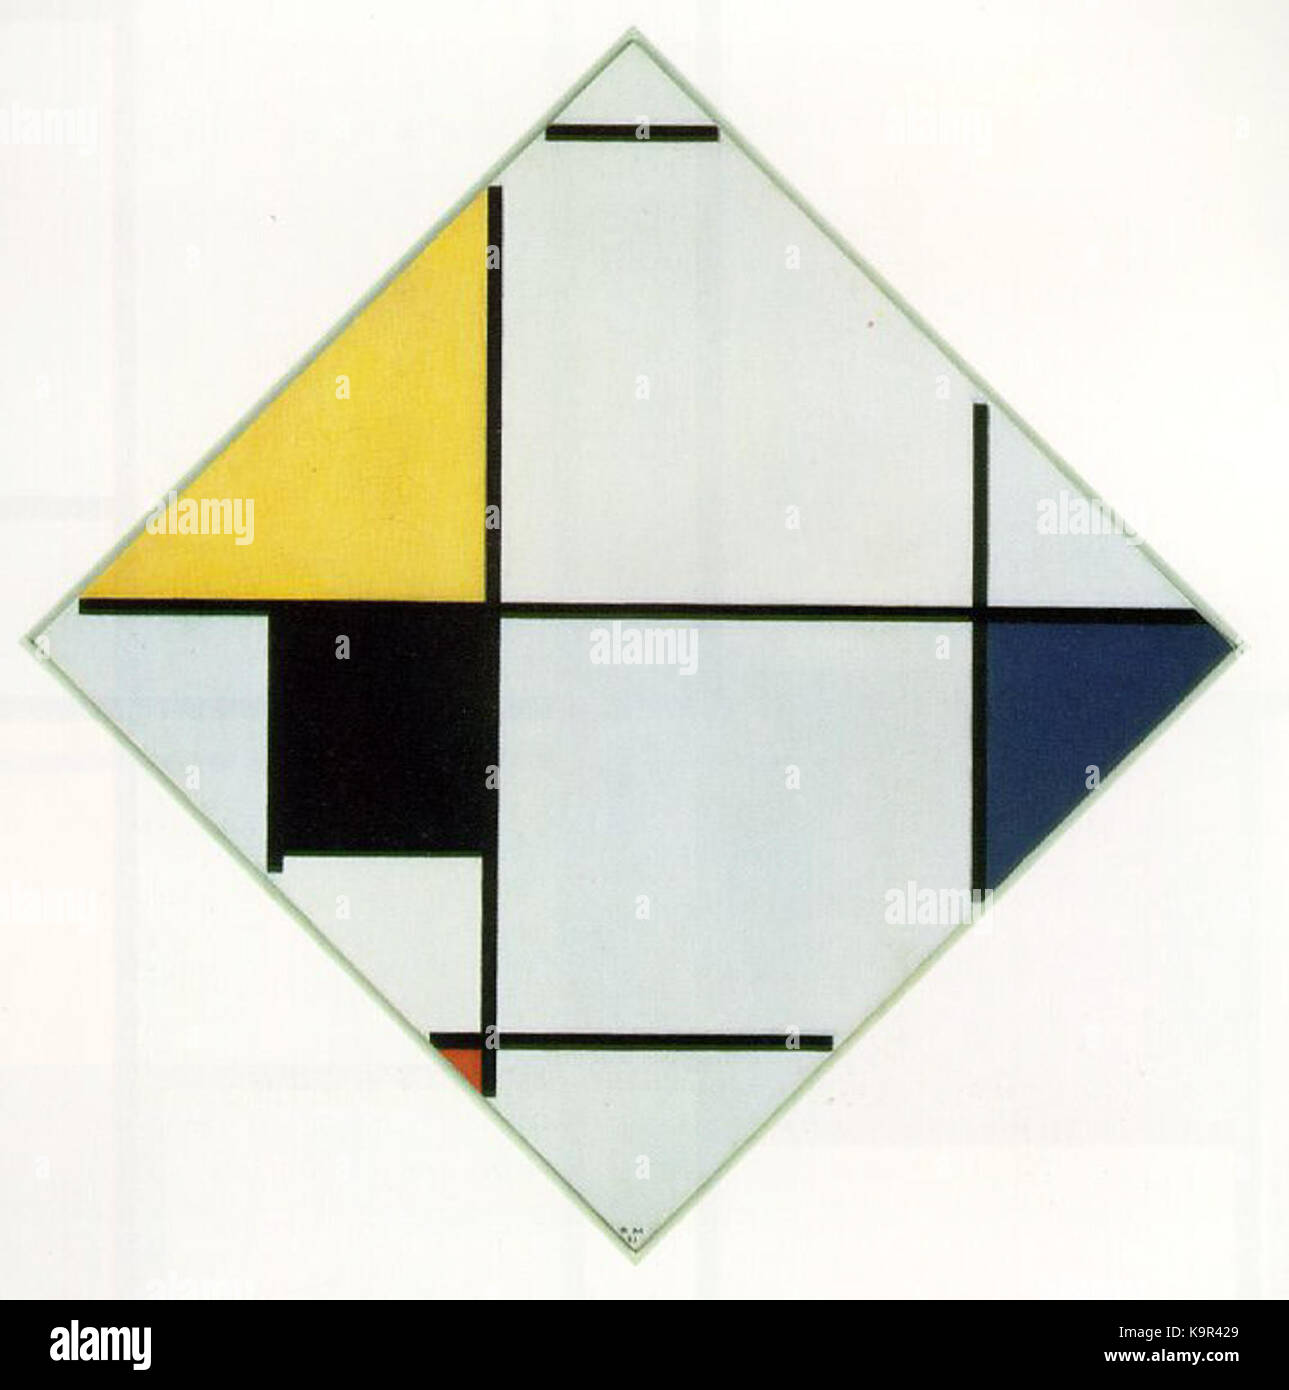 Piet Mondrian Lozenge Composition with Yellow, Black, Blue, Red, and ...